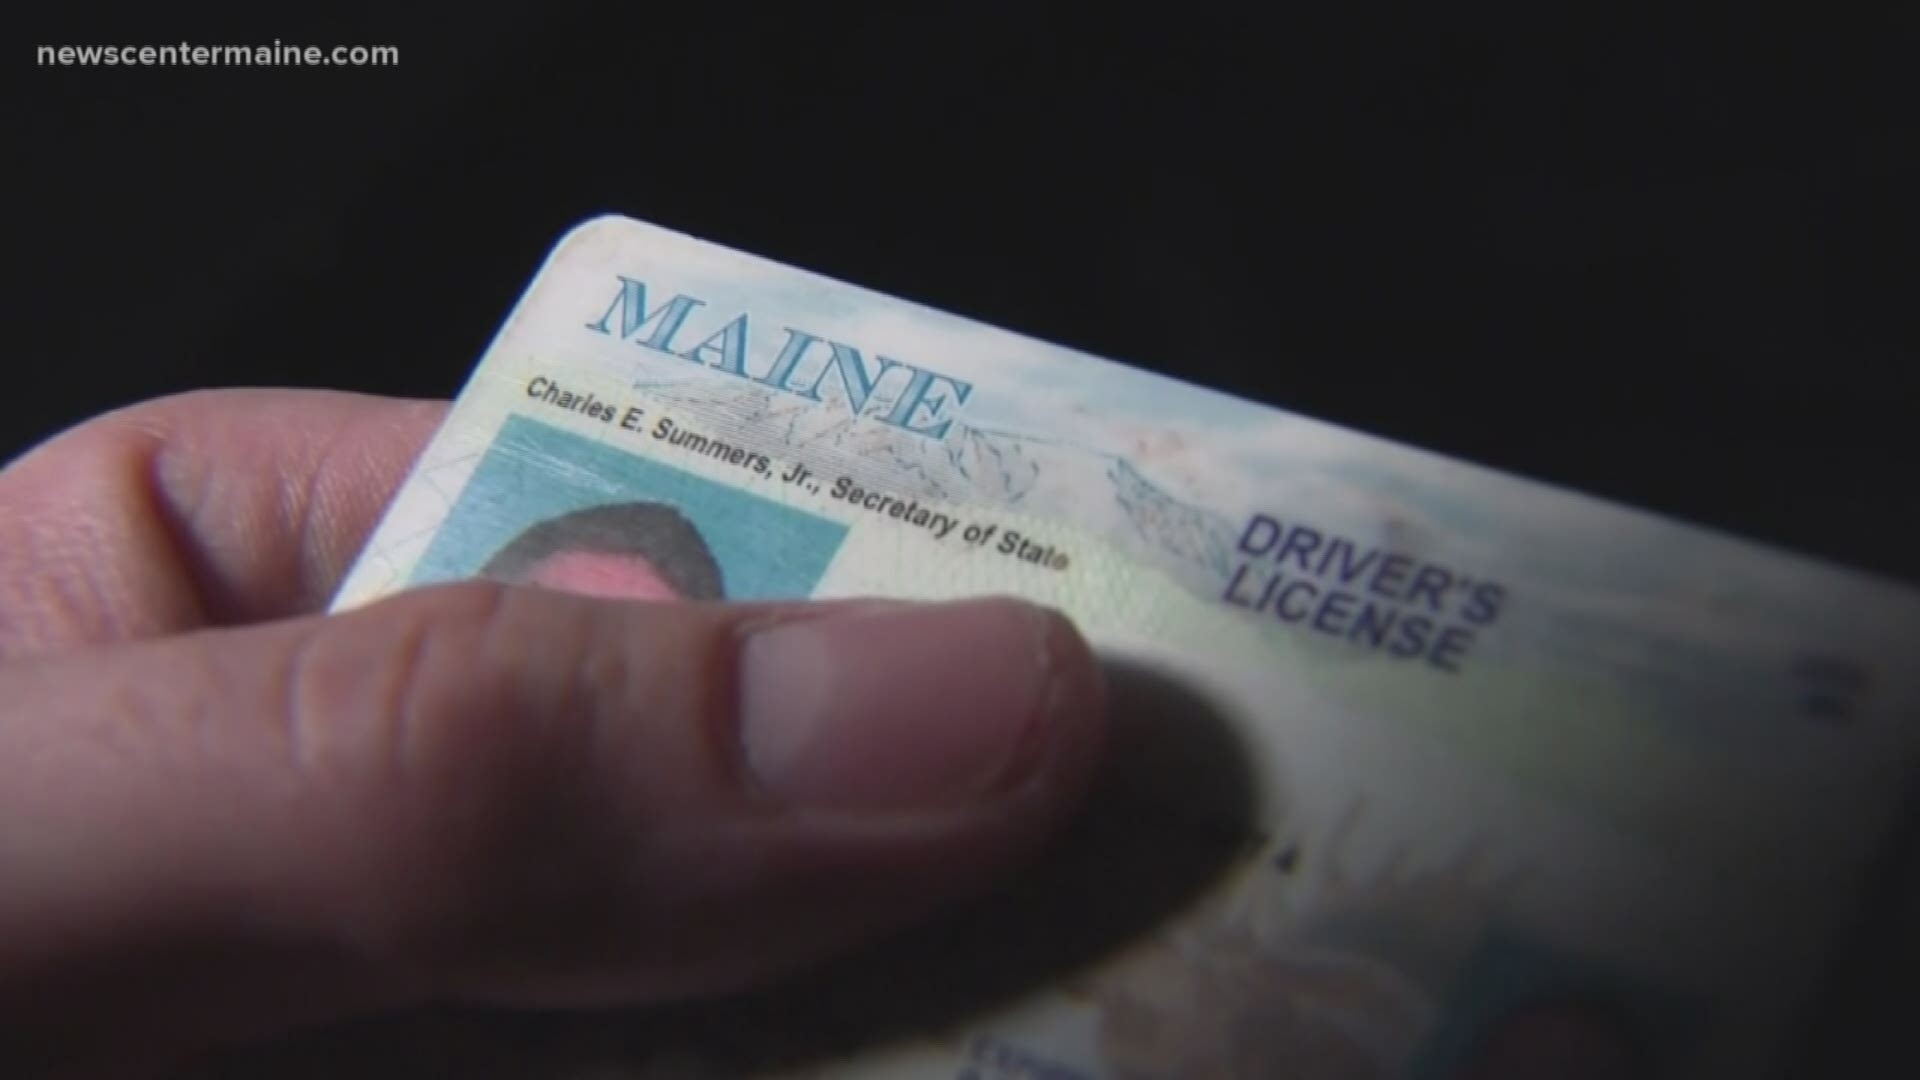 Maine is one of the states selling personal information and data